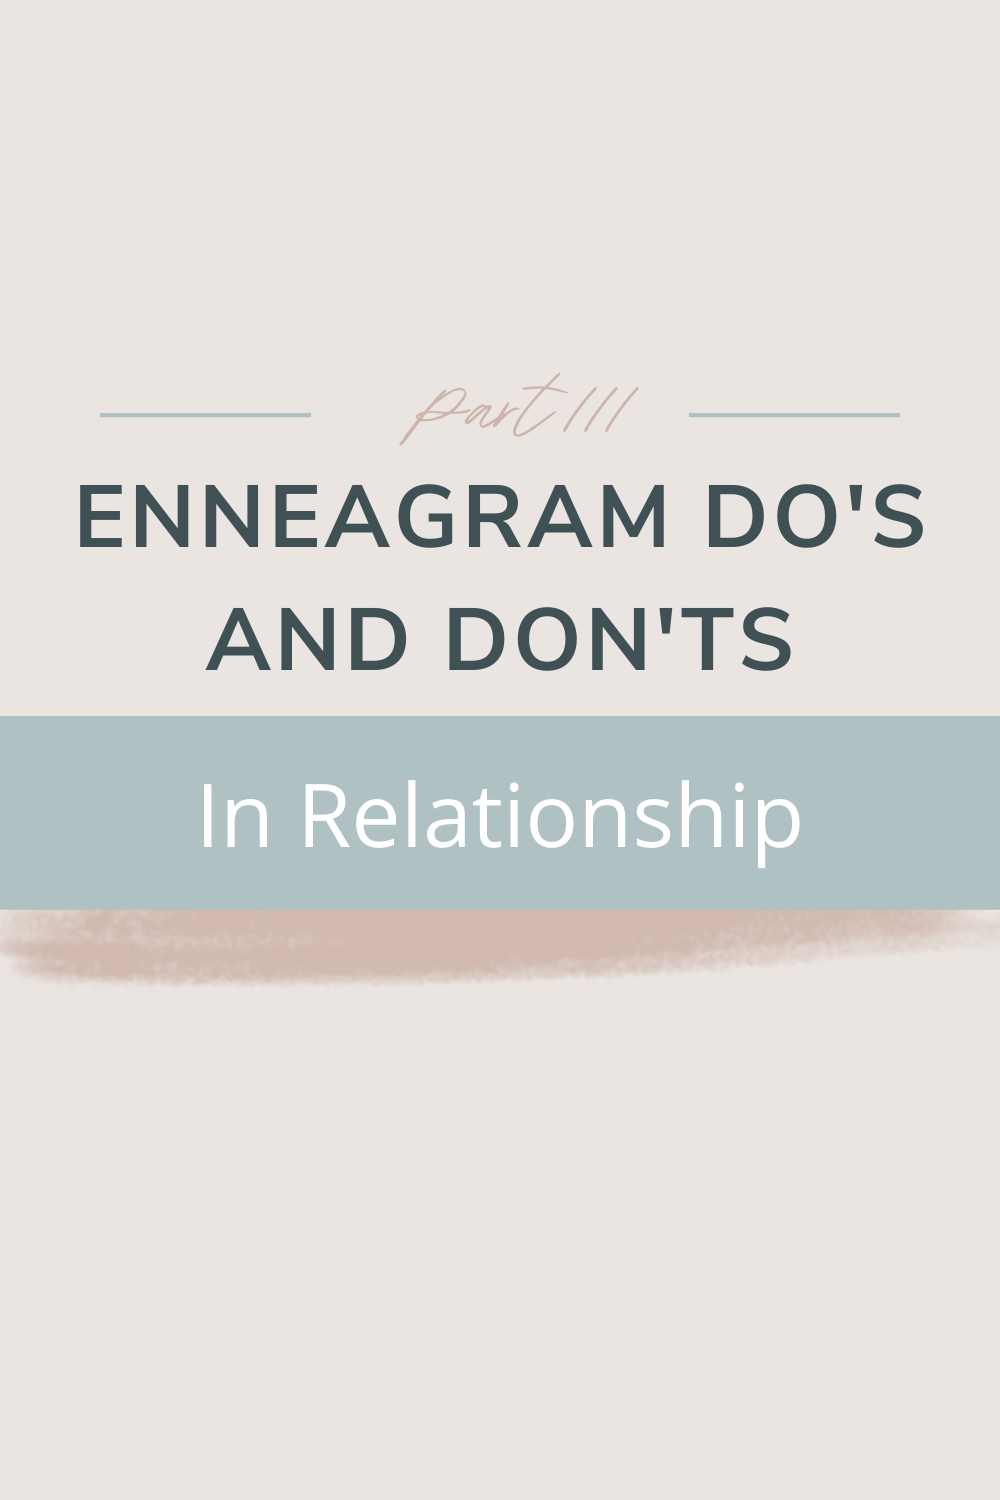 Enneagram Do's and Don'ts in Relationship, Part III | Check out the third recommendation for using the Enneagram in your relationship. This post shares the importance of continuous growth and what that looks like, cheers!